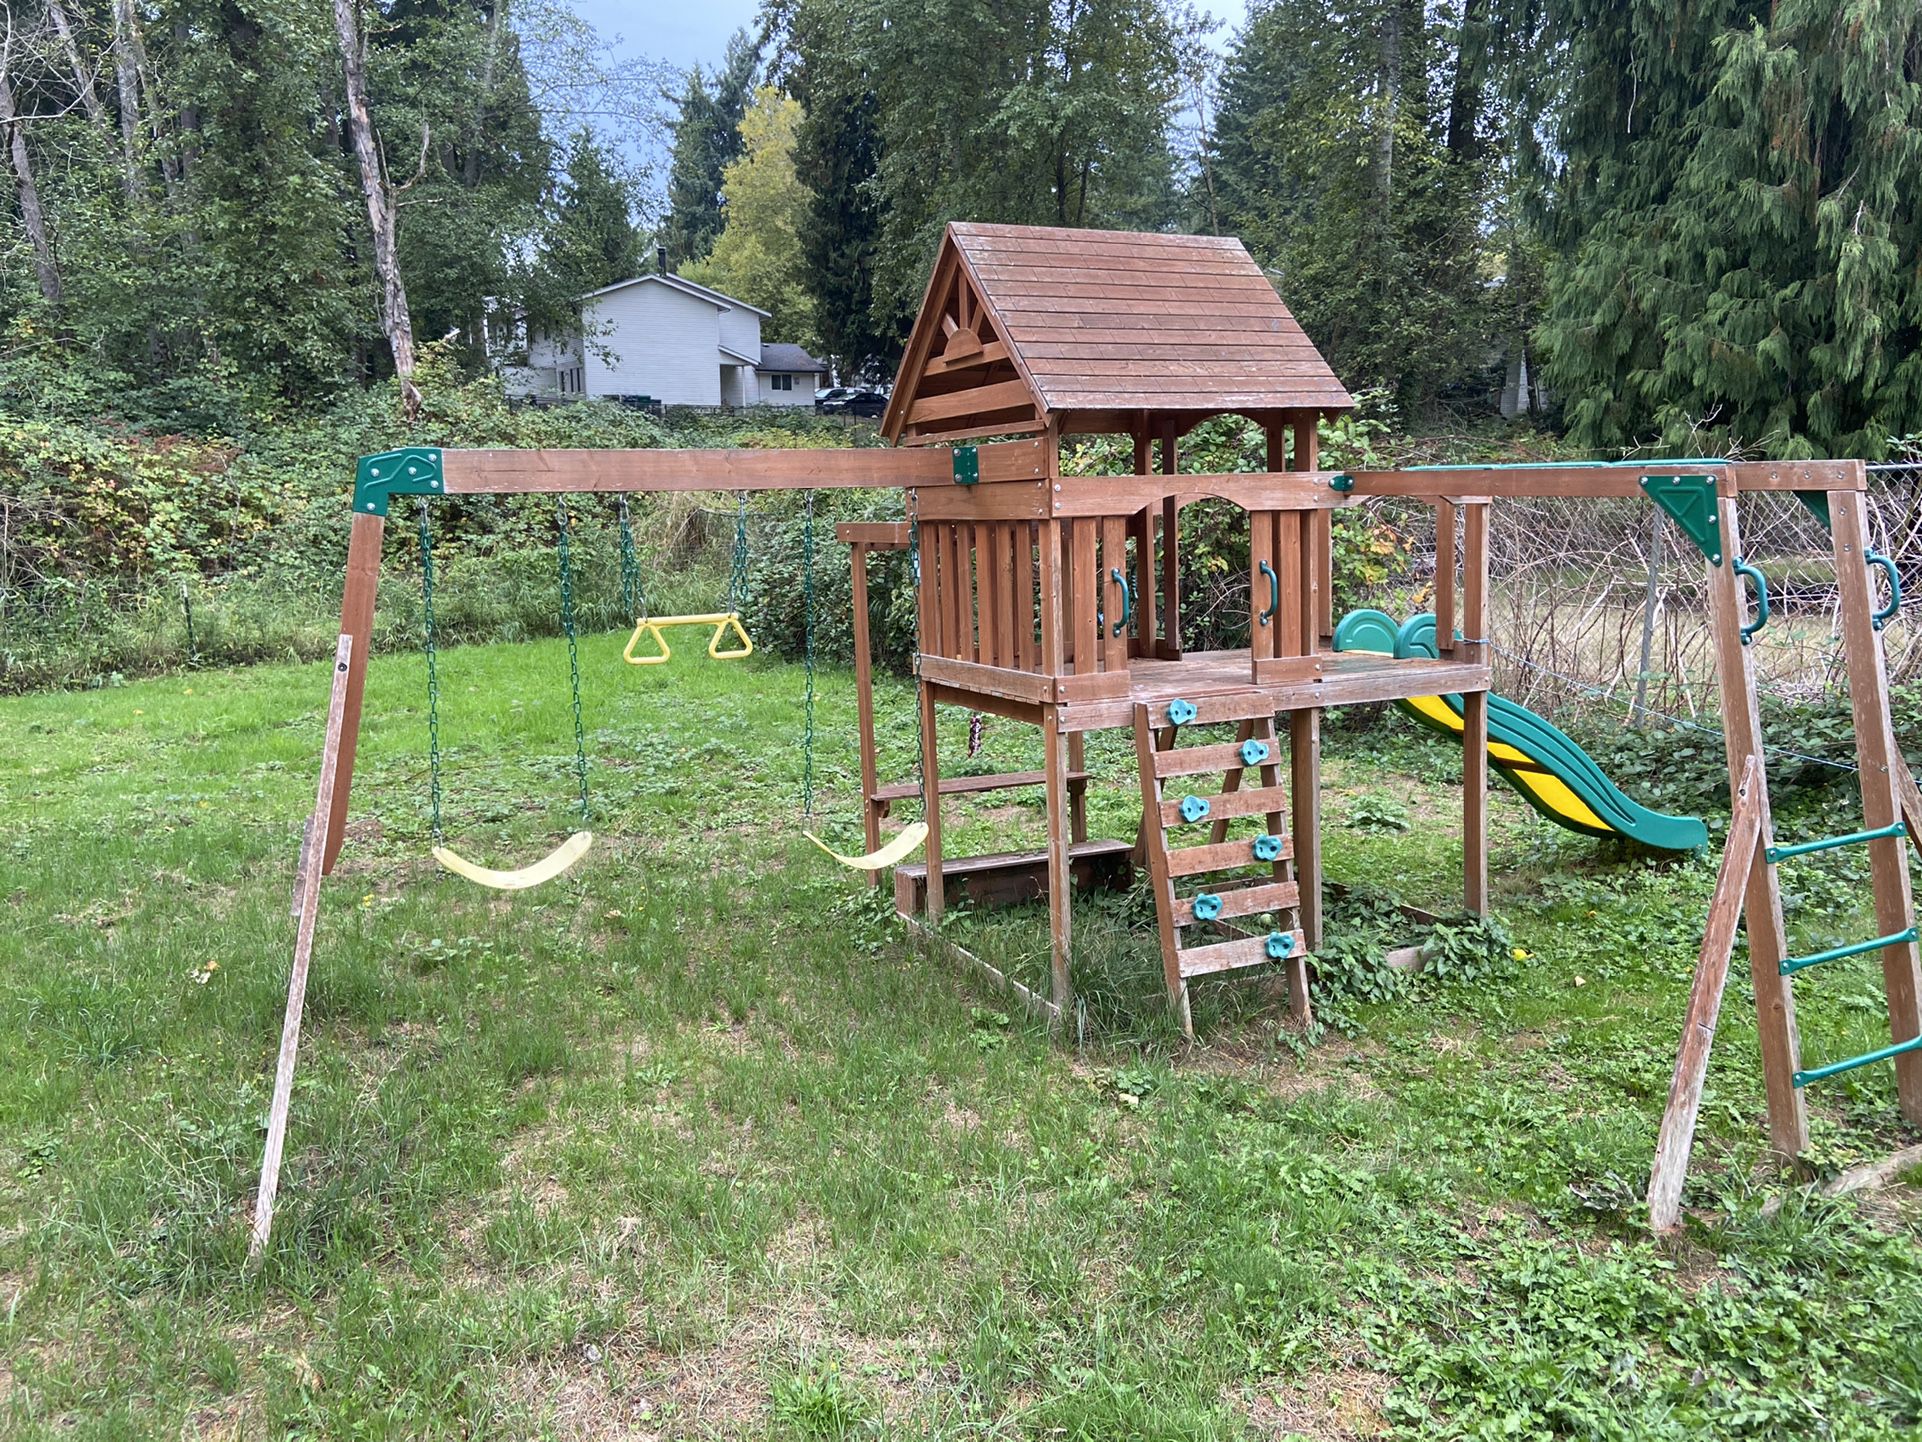 Kids Swing Set And Playscape